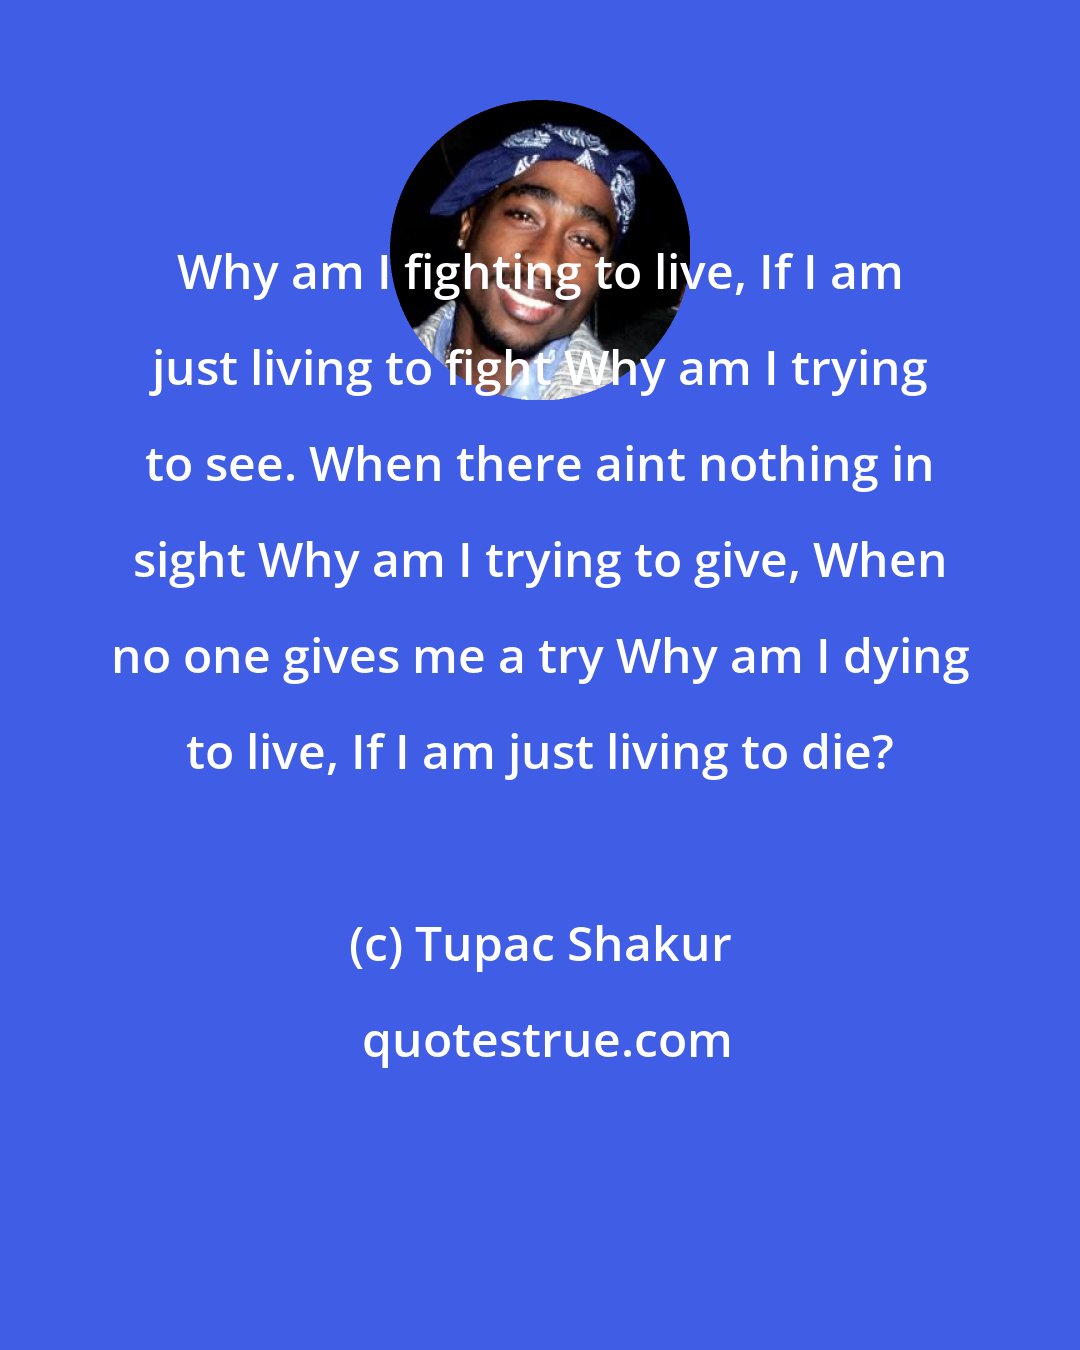 Tupac Shakur: Why am I fighting to live, If I am just living to fight Why am I trying to see. When there aint nothing in sight Why am I trying to give, When no one gives me a try Why am I dying to live, If I am just living to die?